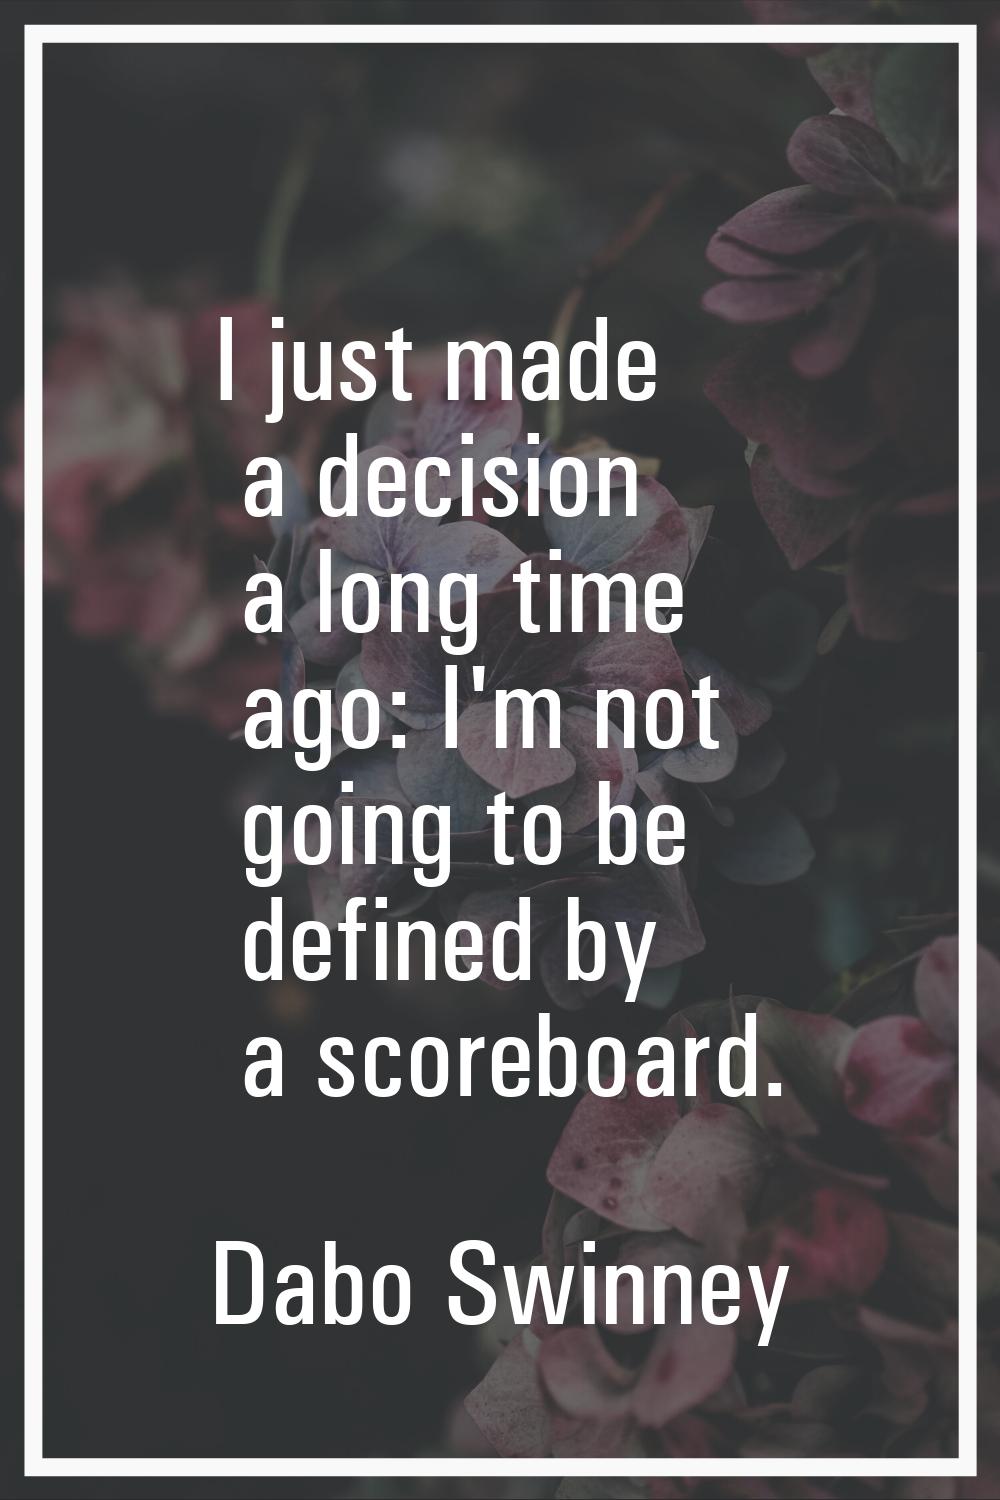 I just made a decision a long time ago: I'm not going to be defined by a scoreboard.